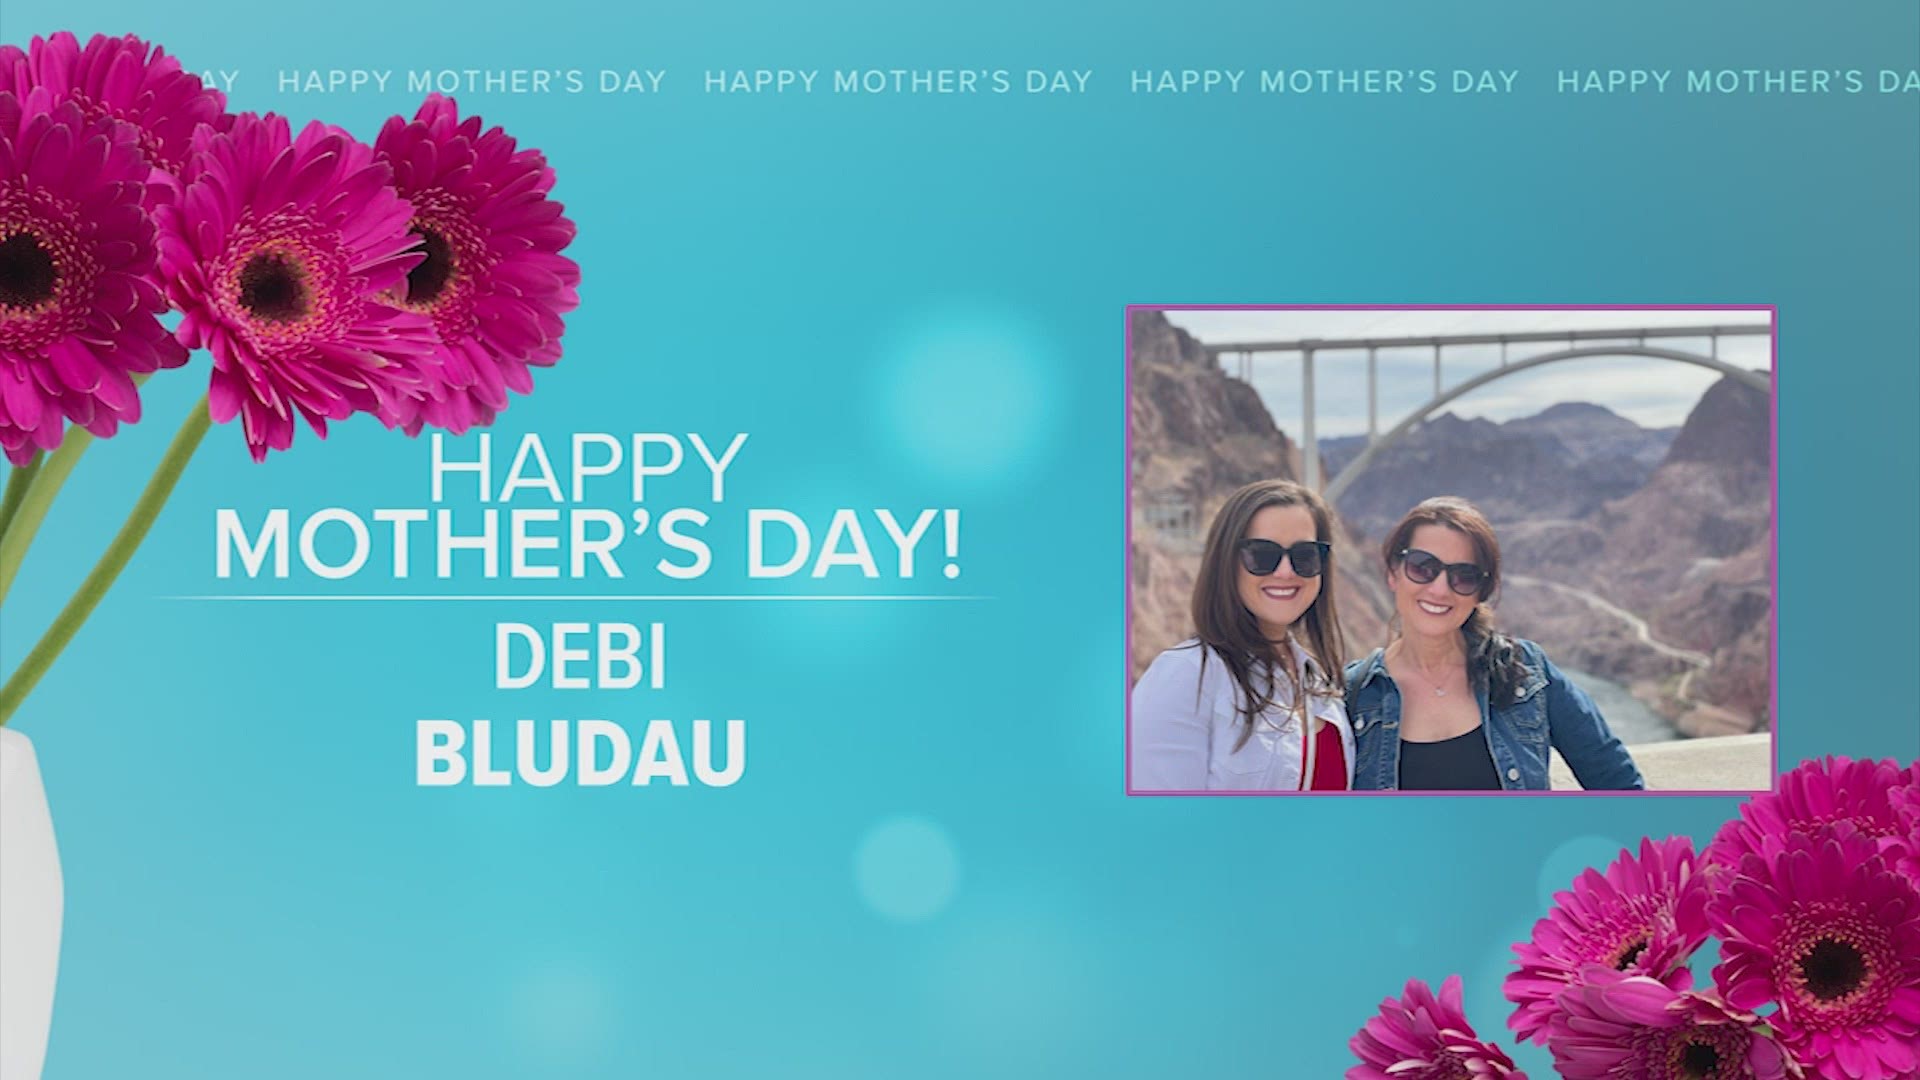 Happy Mother's Day from KHOU 11